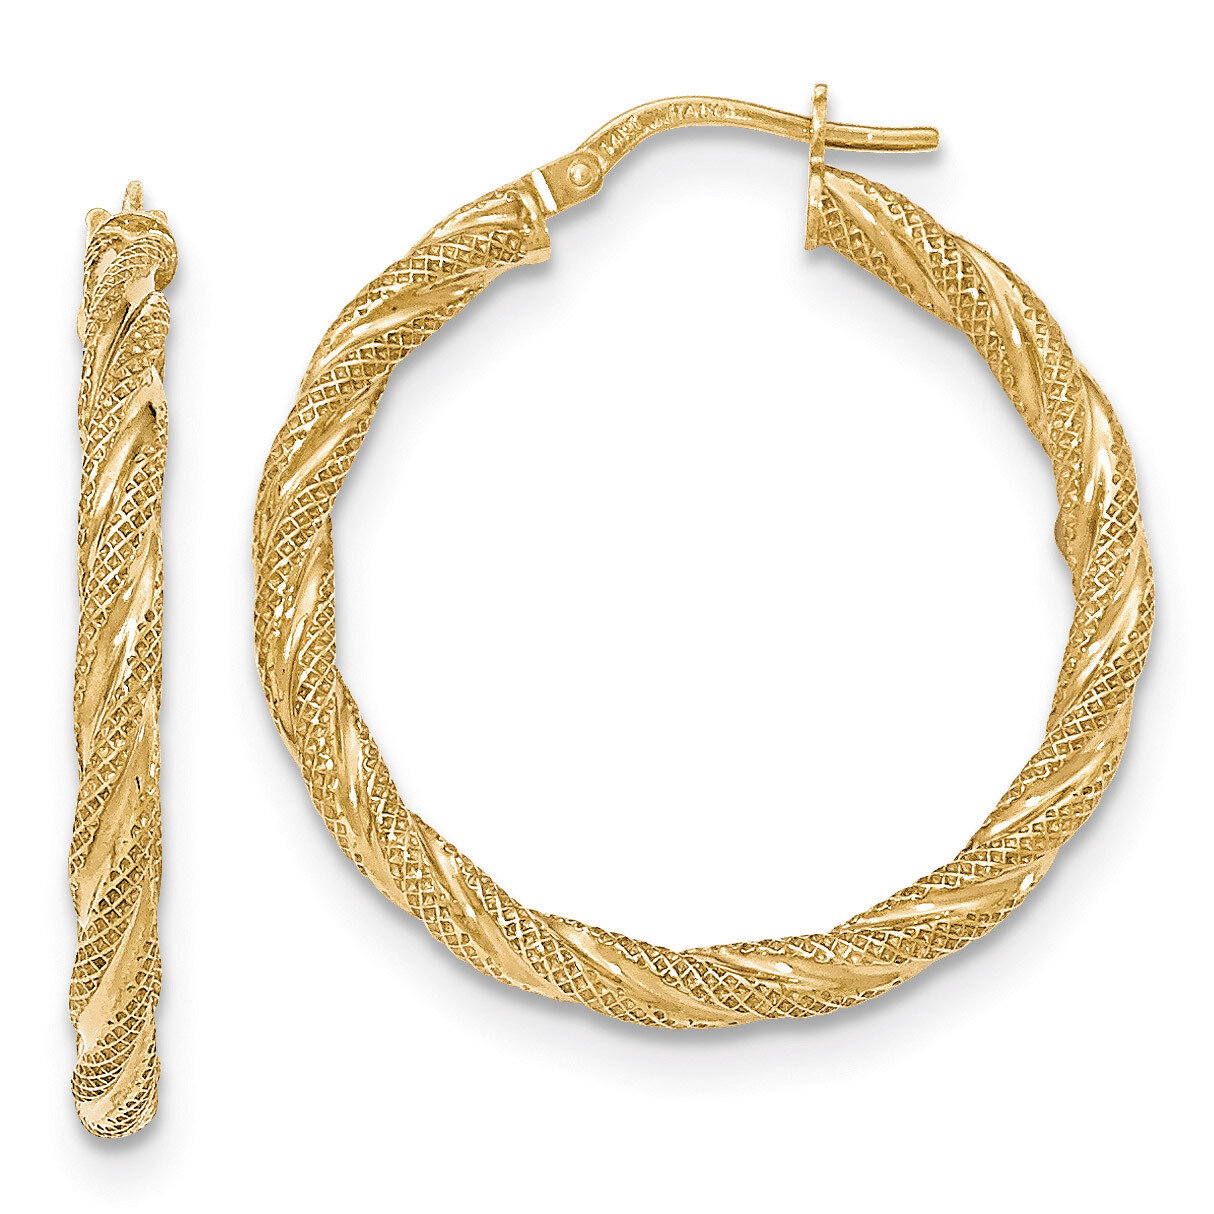 Hoop Earrings 14k Gold Twisted Textured TH695